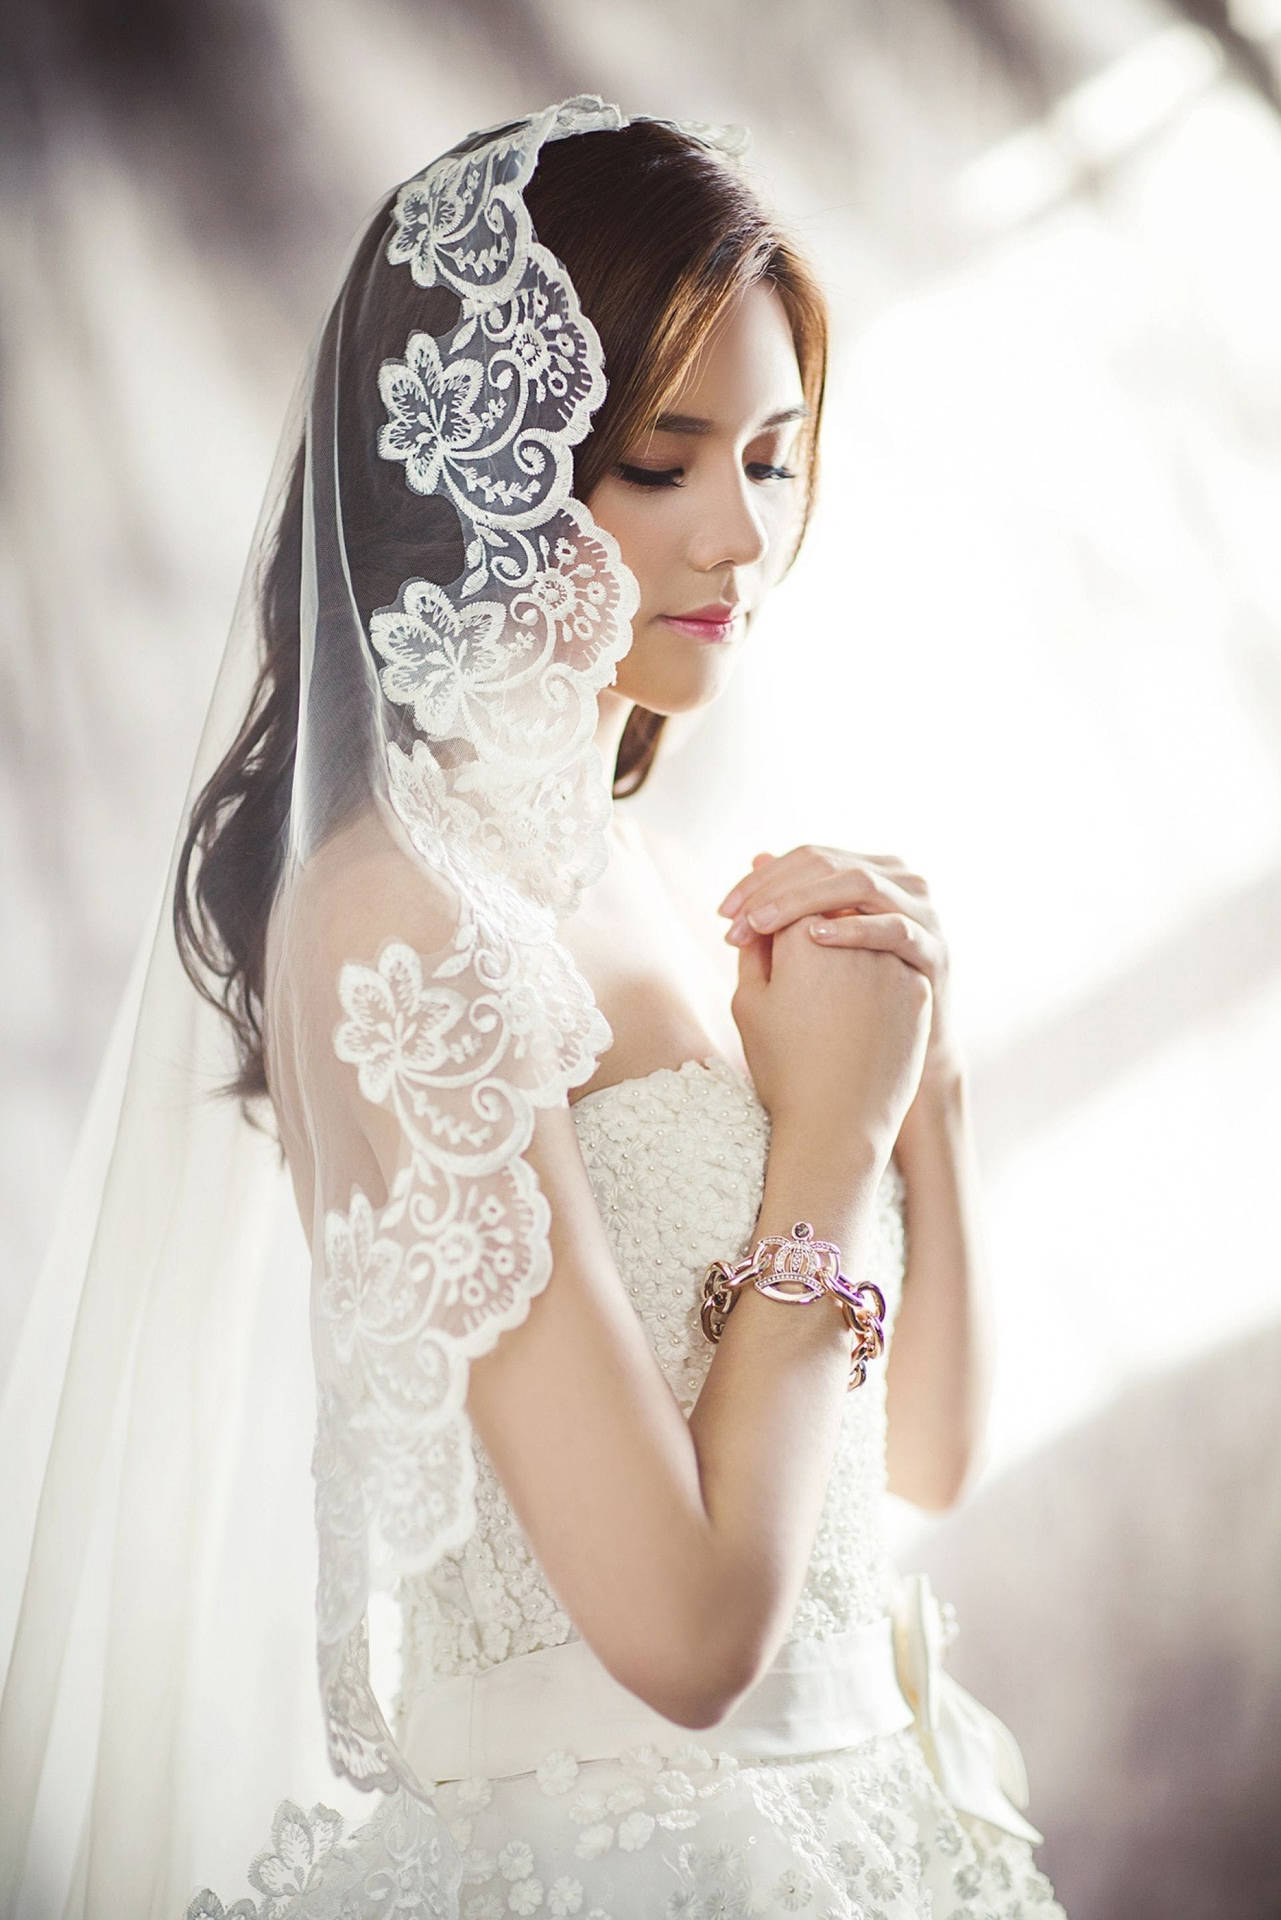 Bride 1921X2879 Wallpaper and Background Image